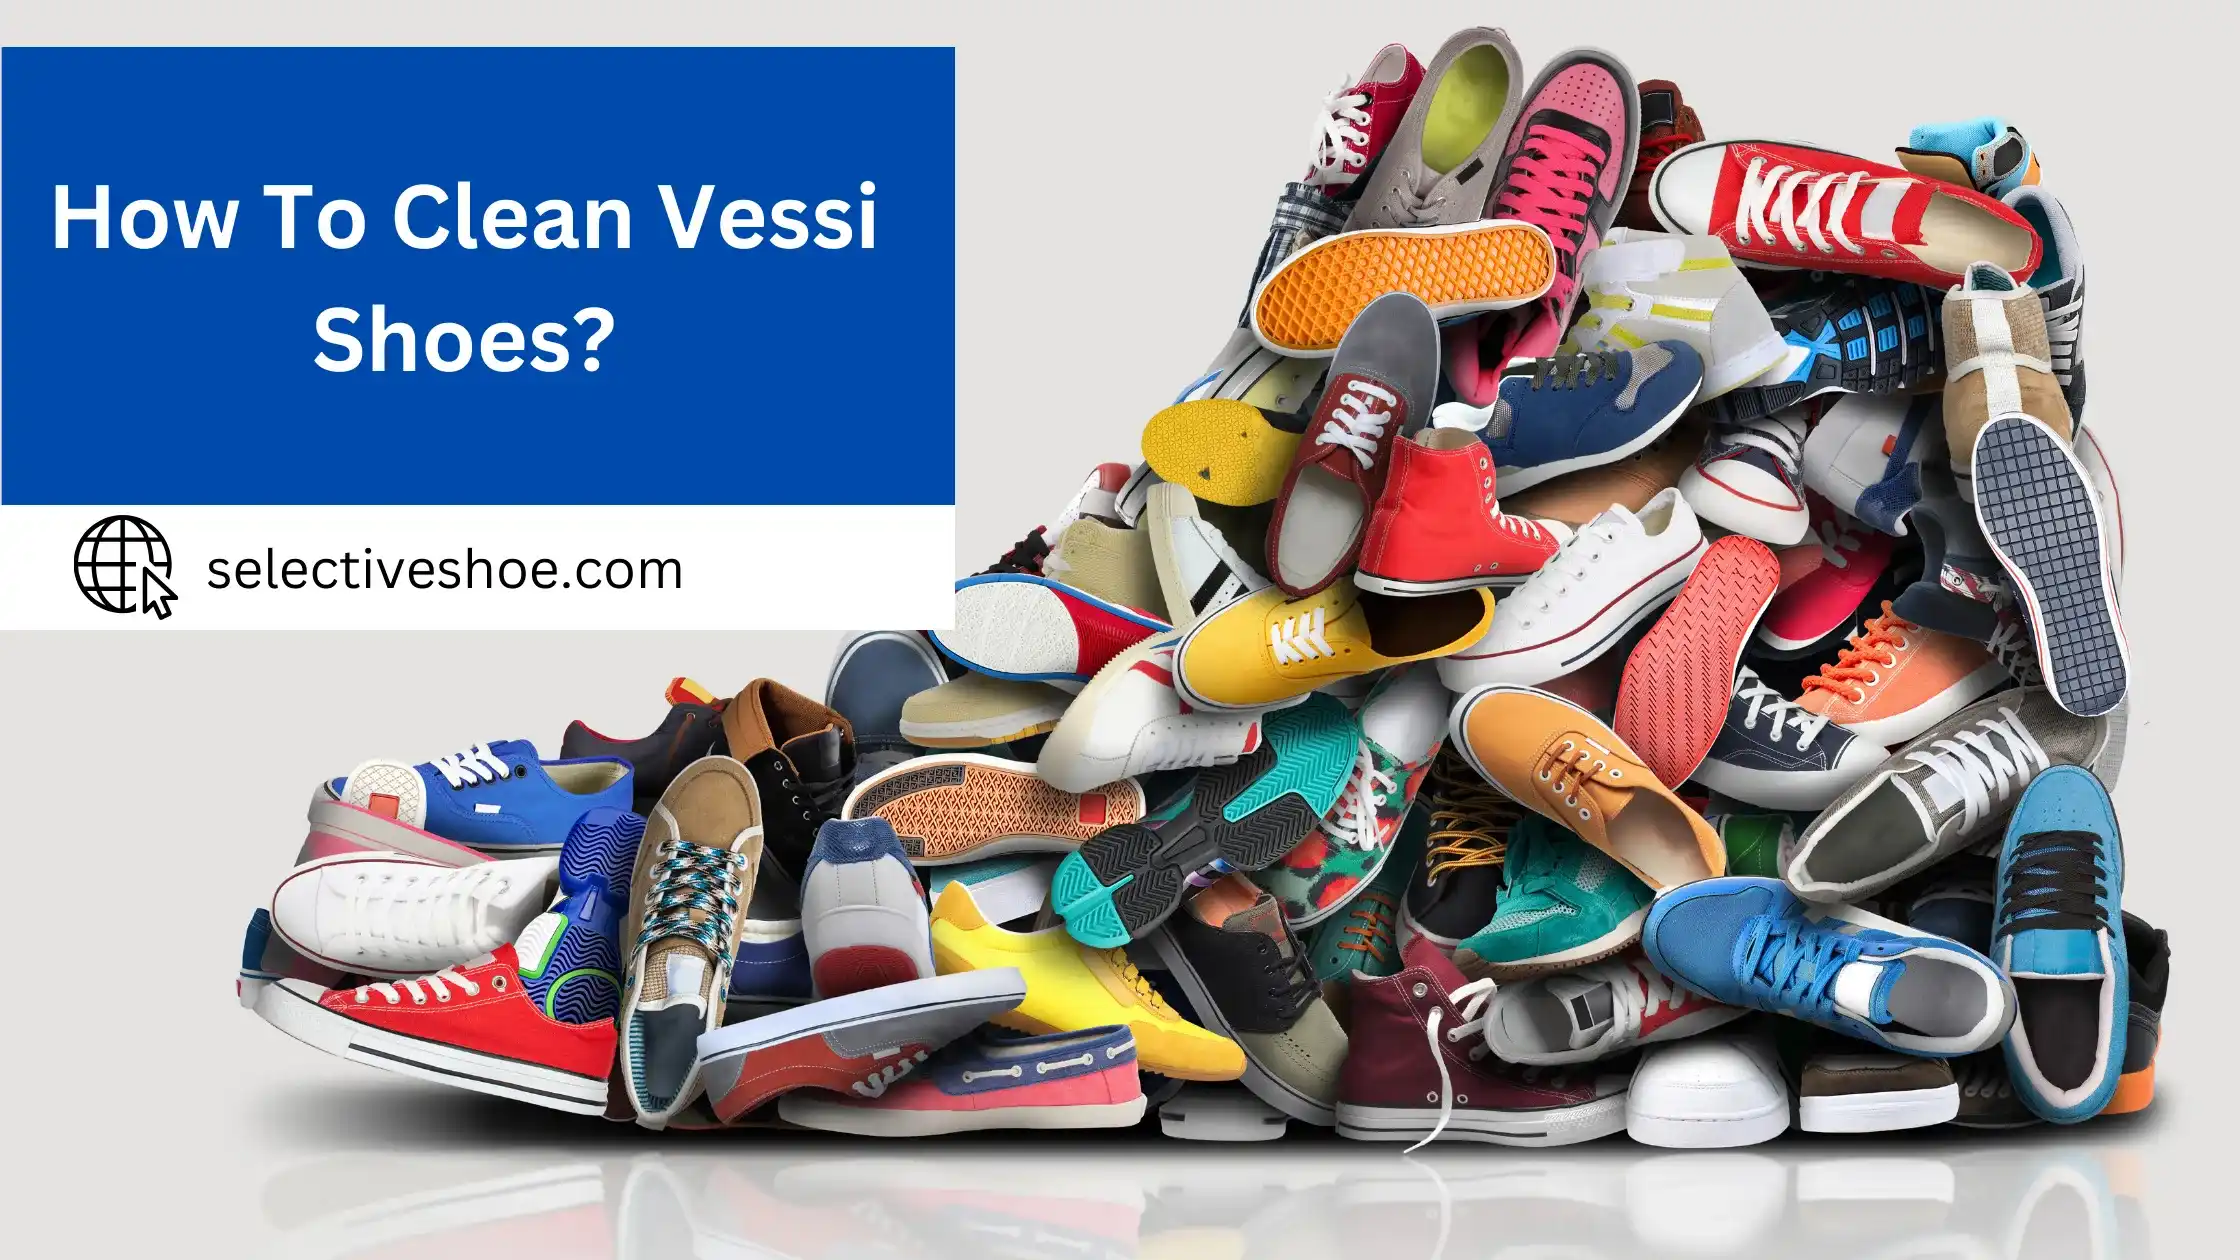 How to Clean Vessi Shoes? Proper Cleaning Instructions